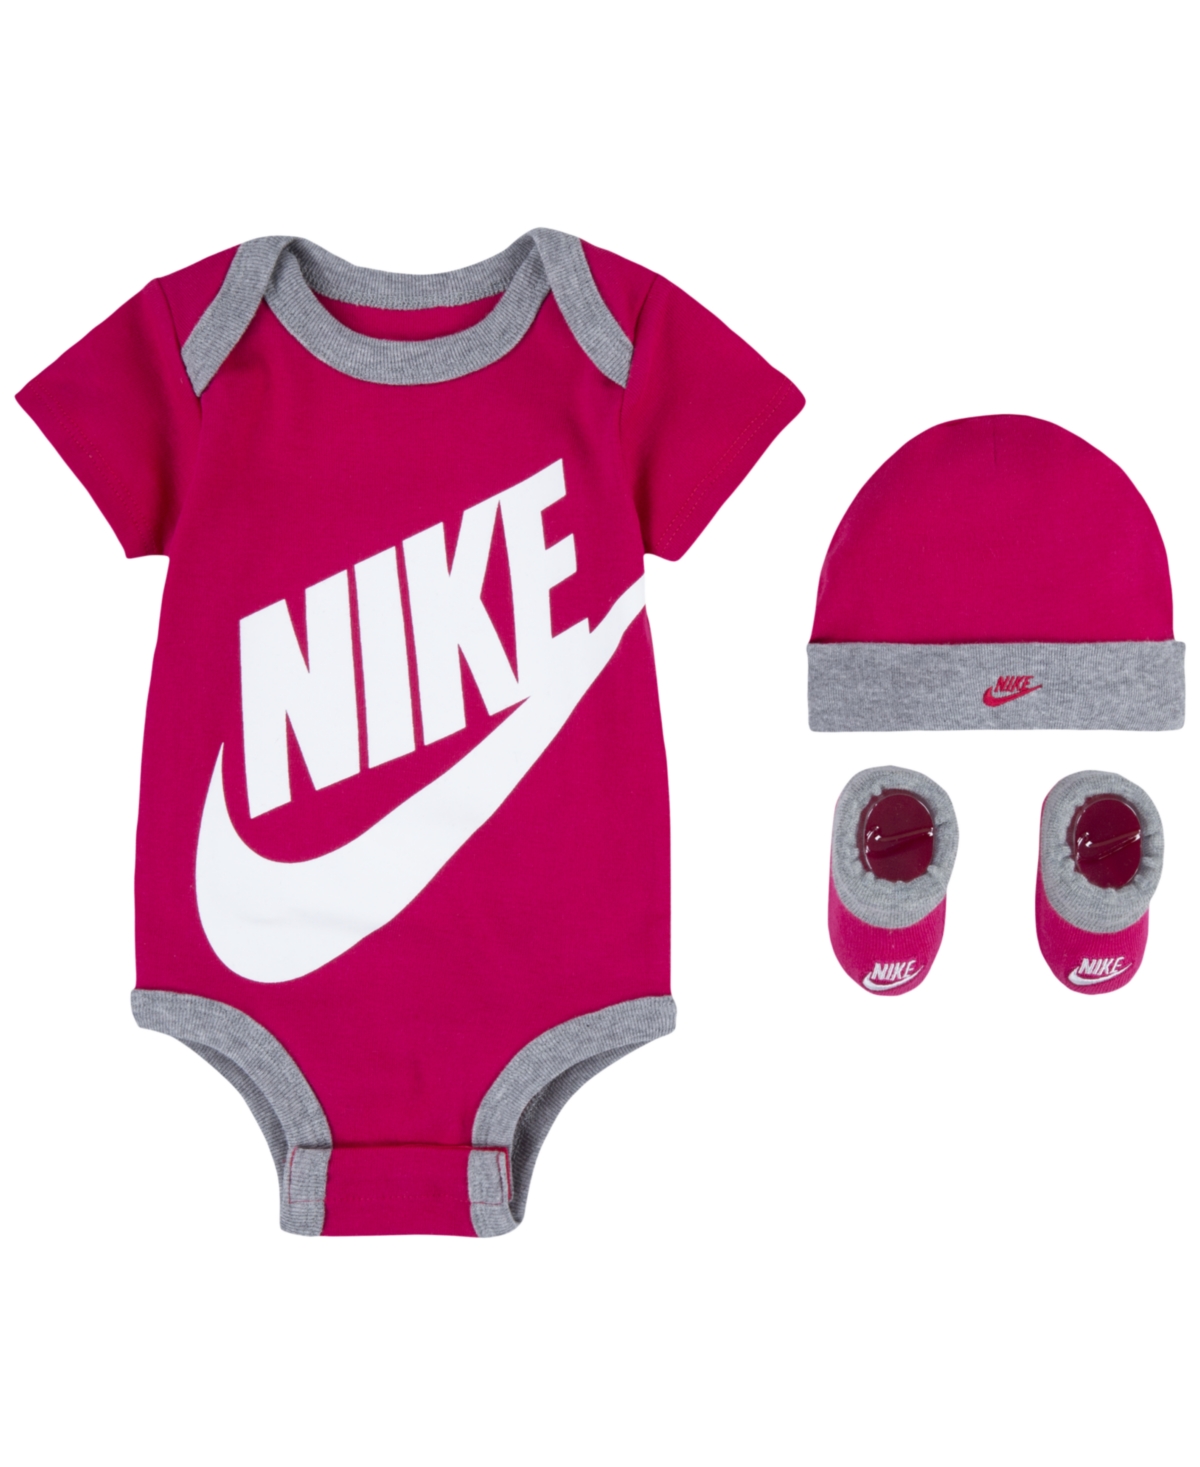 Nike Baby Boys Or Baby Girls Futura Logo Bodysuit, Beanie, And Booties, 3 Piece Gift Box Set In Rush Pink